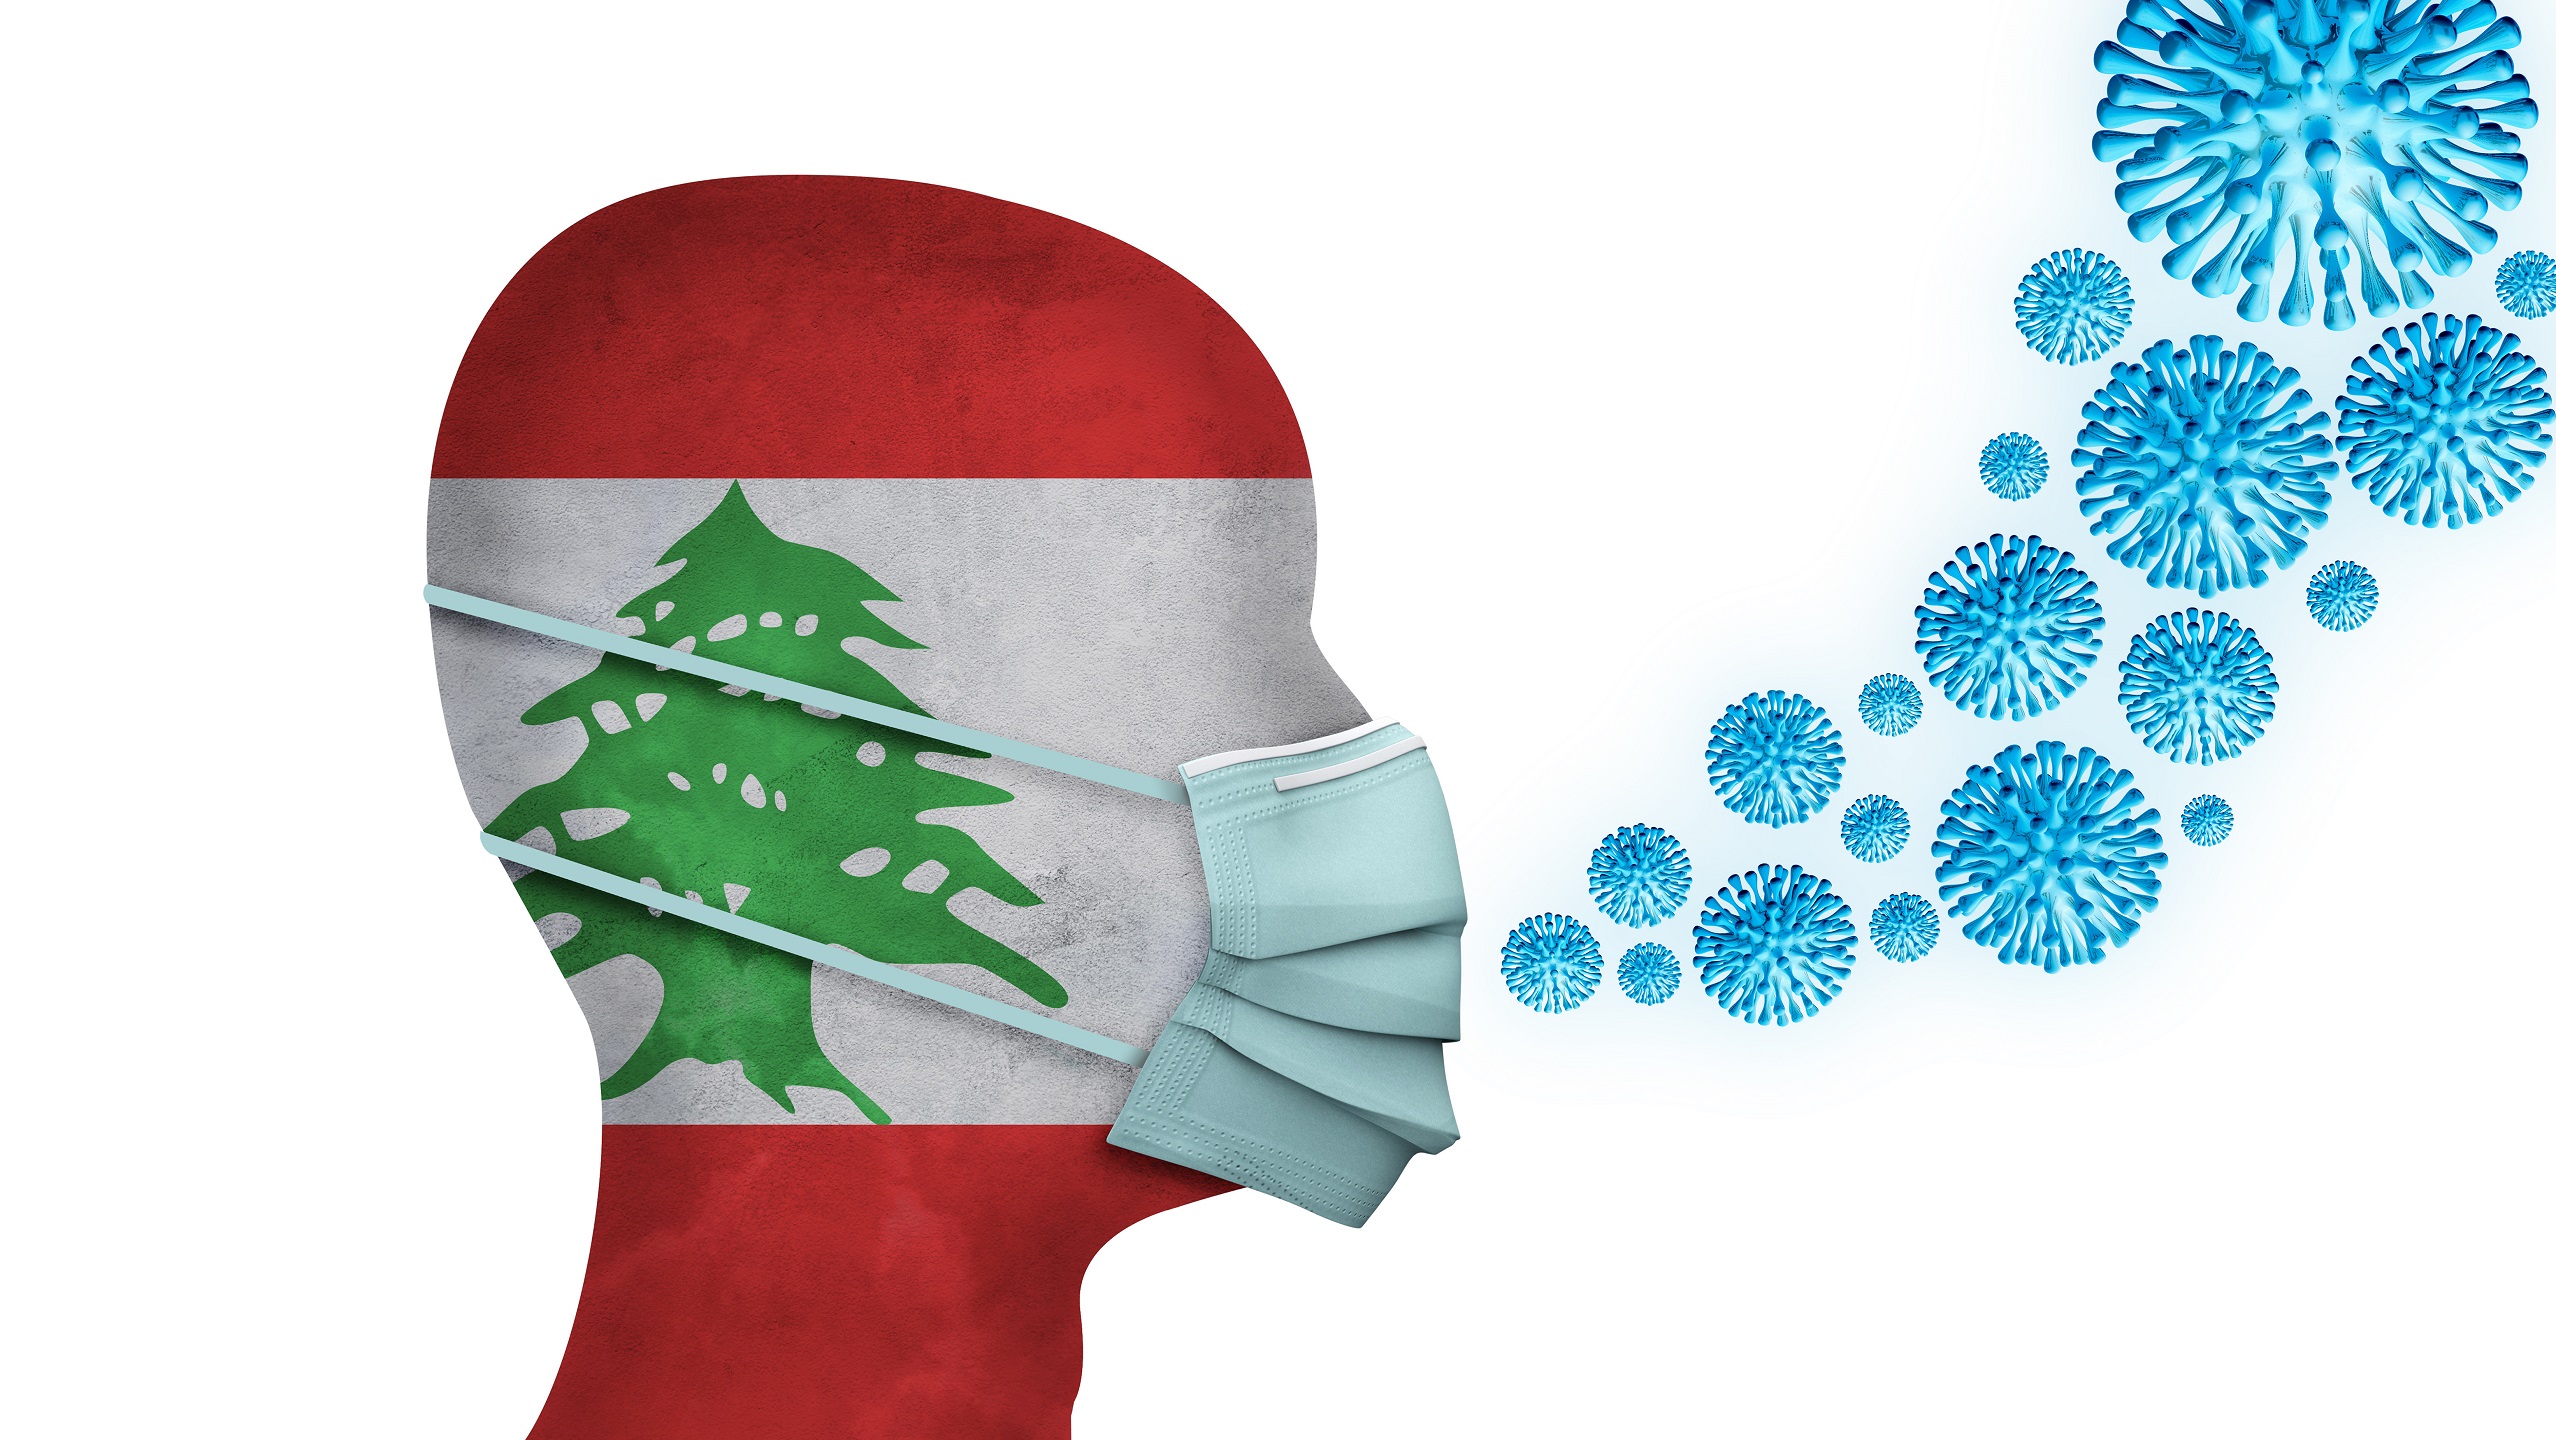 Lebanon’s Health Minister Urges Citizens Not To Abandon COVID-19 Measures